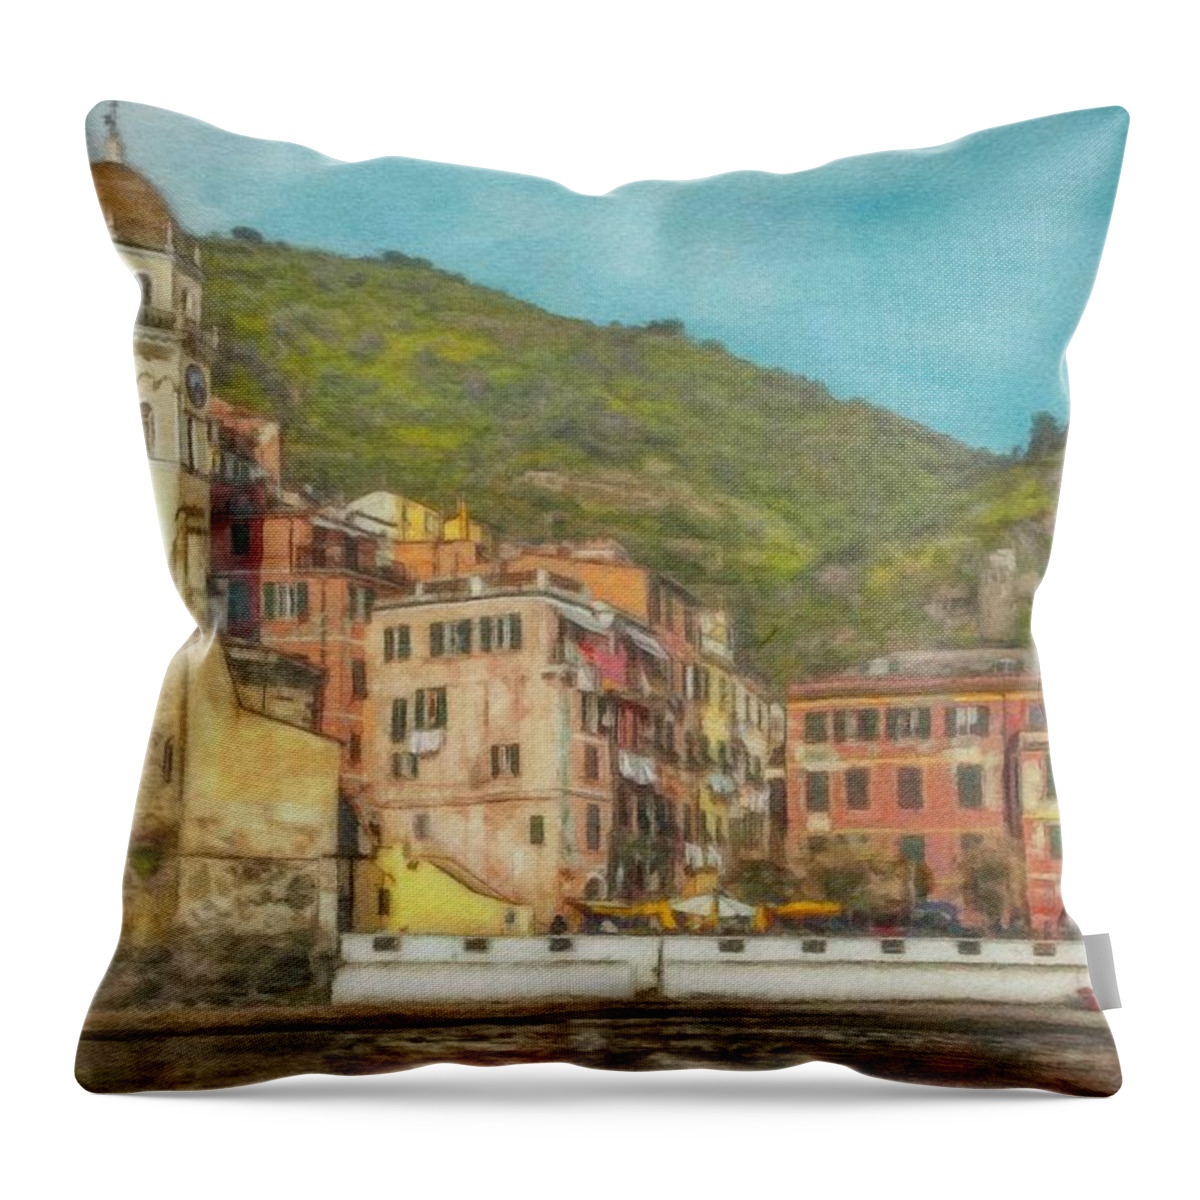 Water Throw Pillow featuring the painting Vernazza Up Close by Jeffrey Kolker